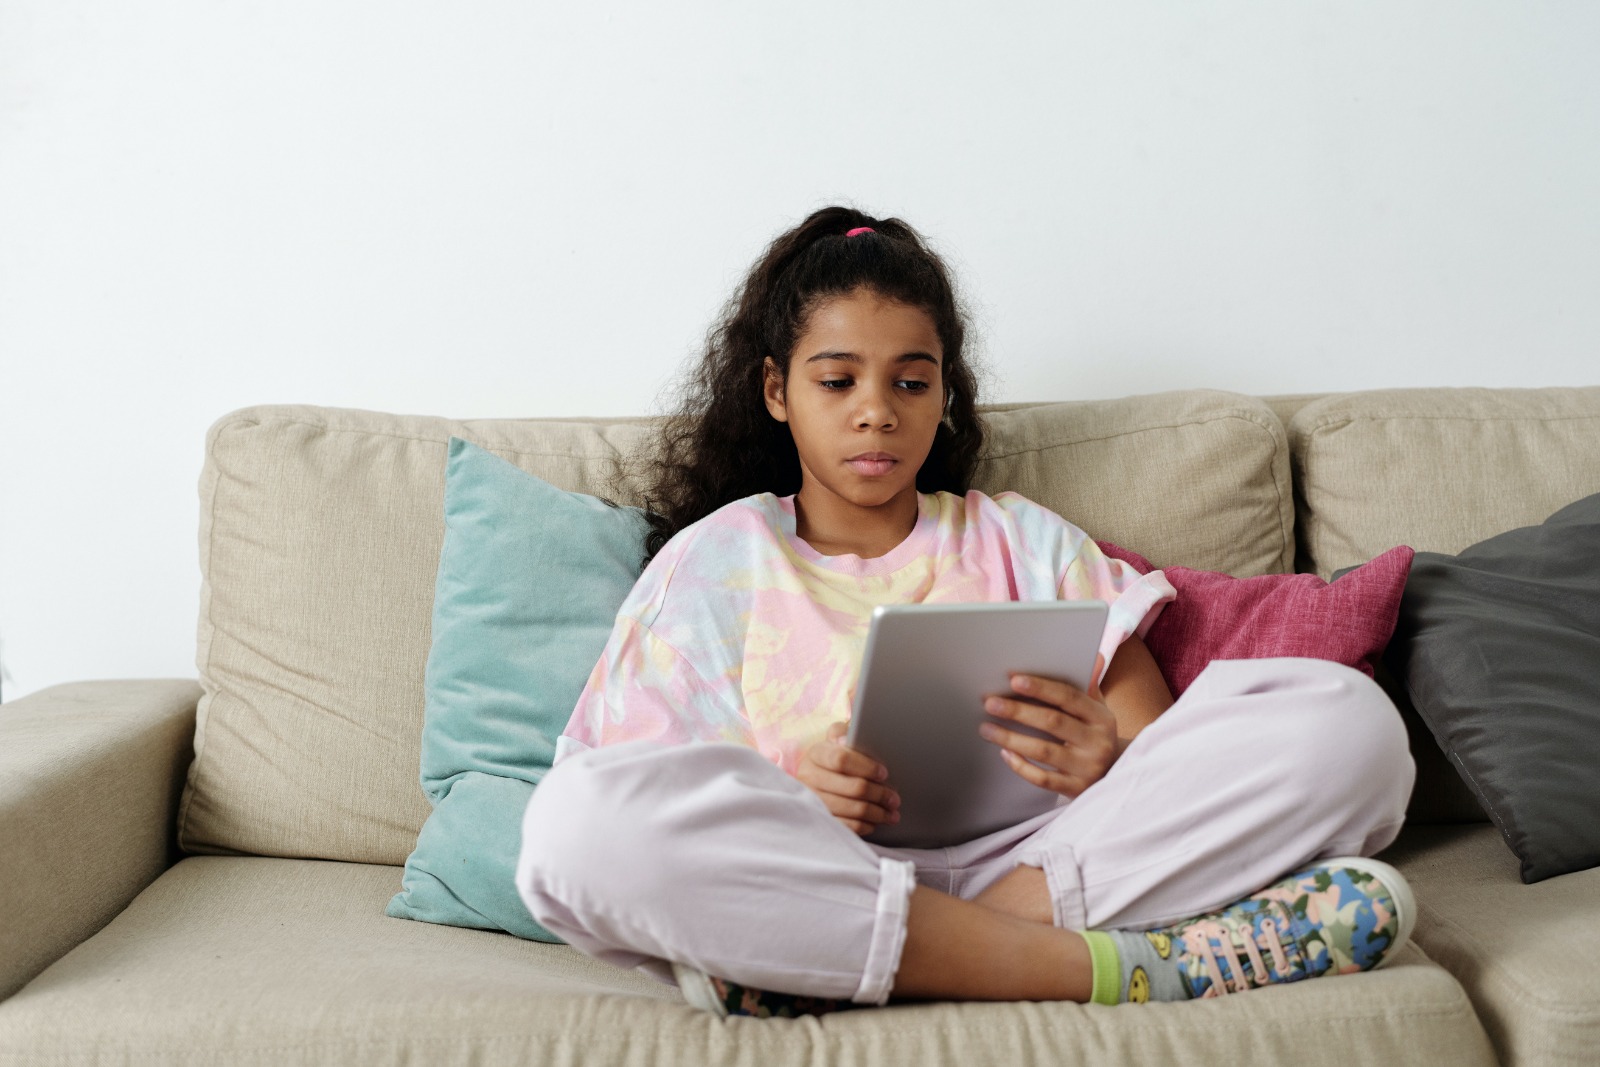 How to keep your kid’s screen time (and your sanity!) from spiraling out of control